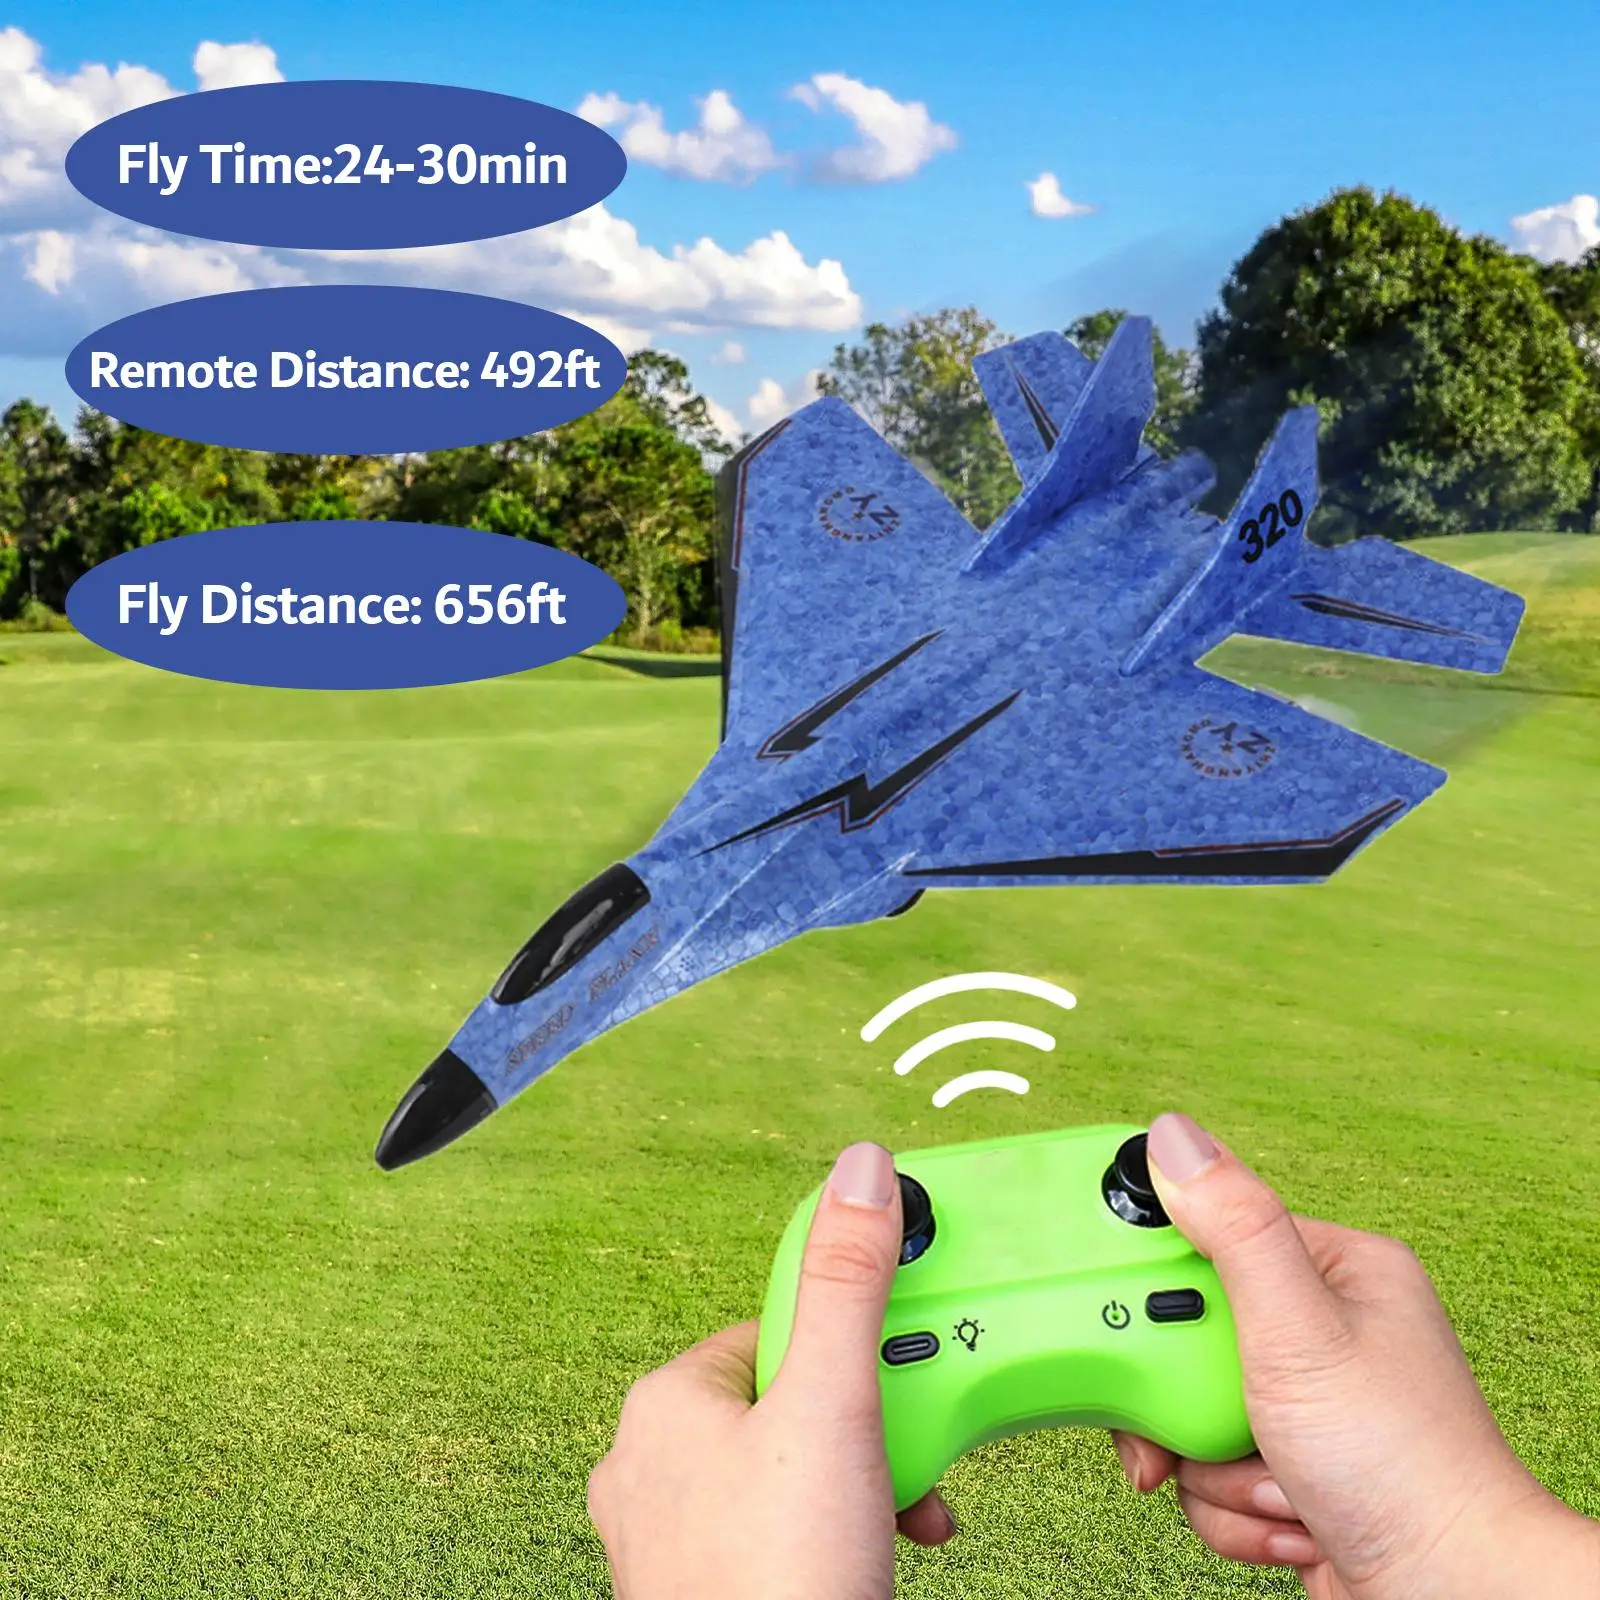 RC Glider Foam Model Remote Control Aircraft RC Plane Toy Easy to Control